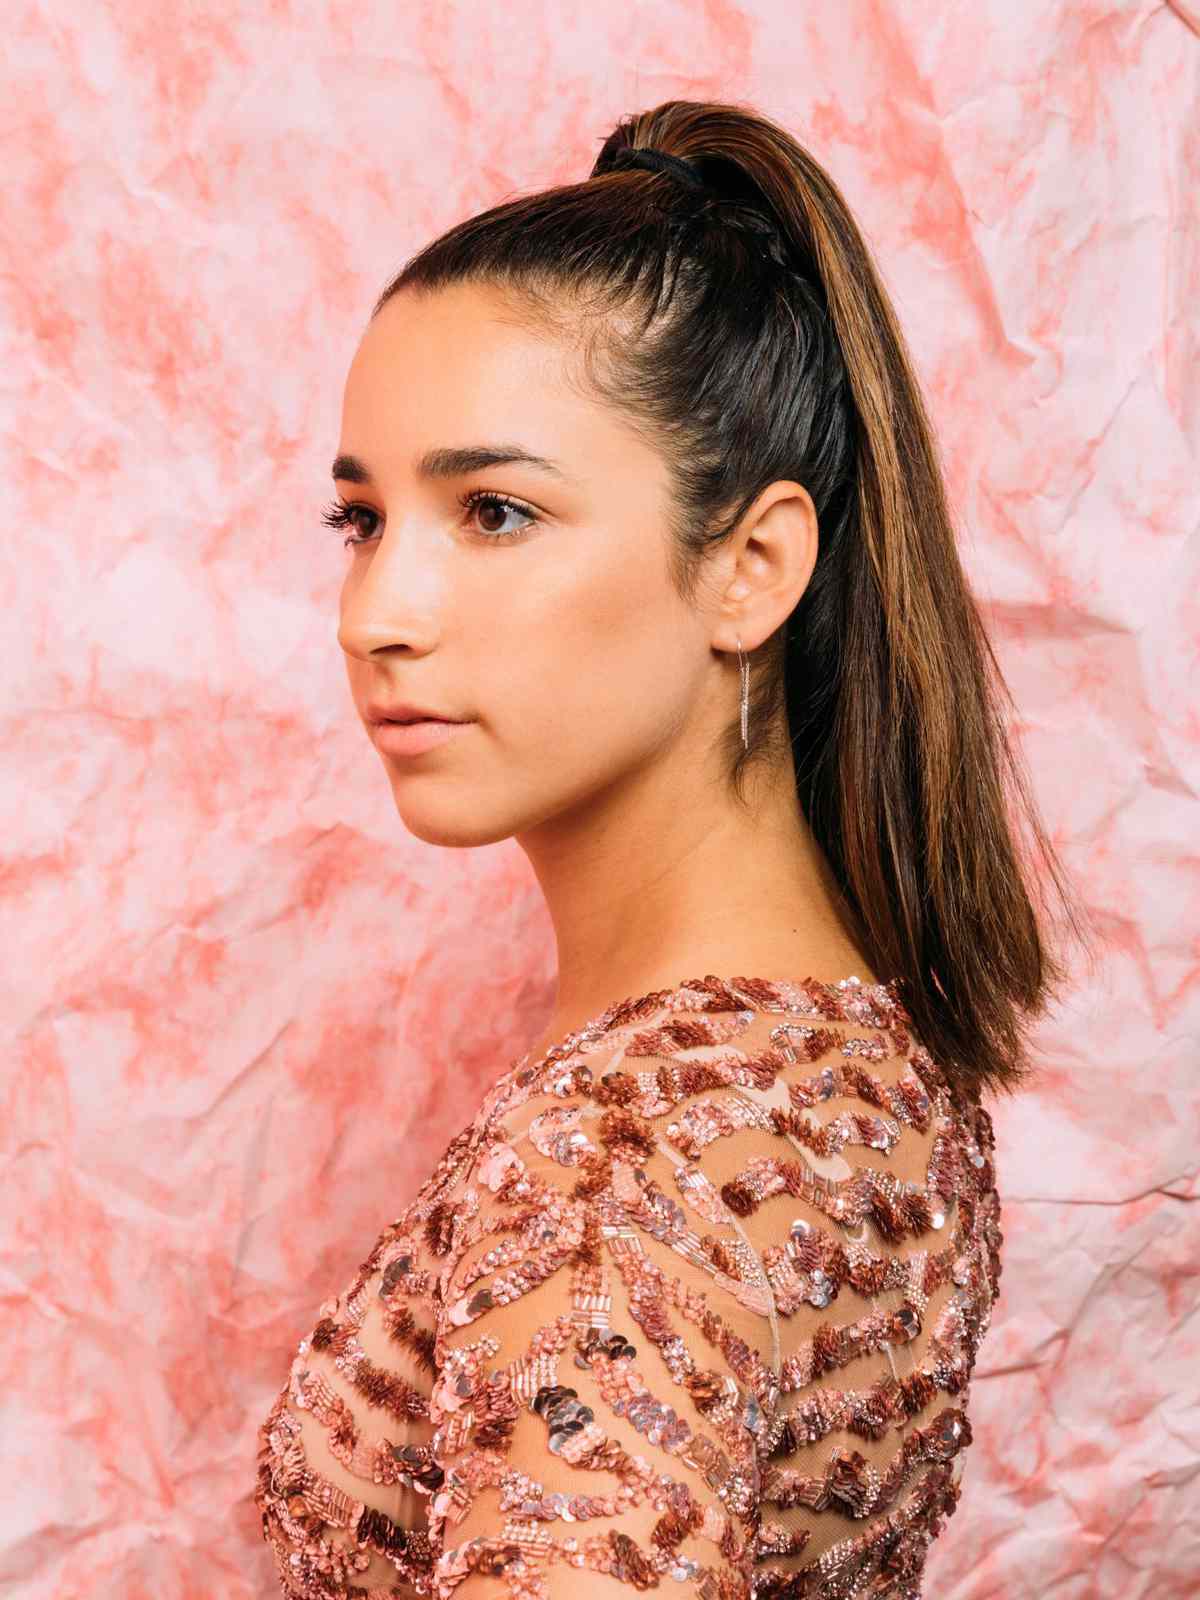 The aly raisman posed illustrated for nude sports Aly Raisman